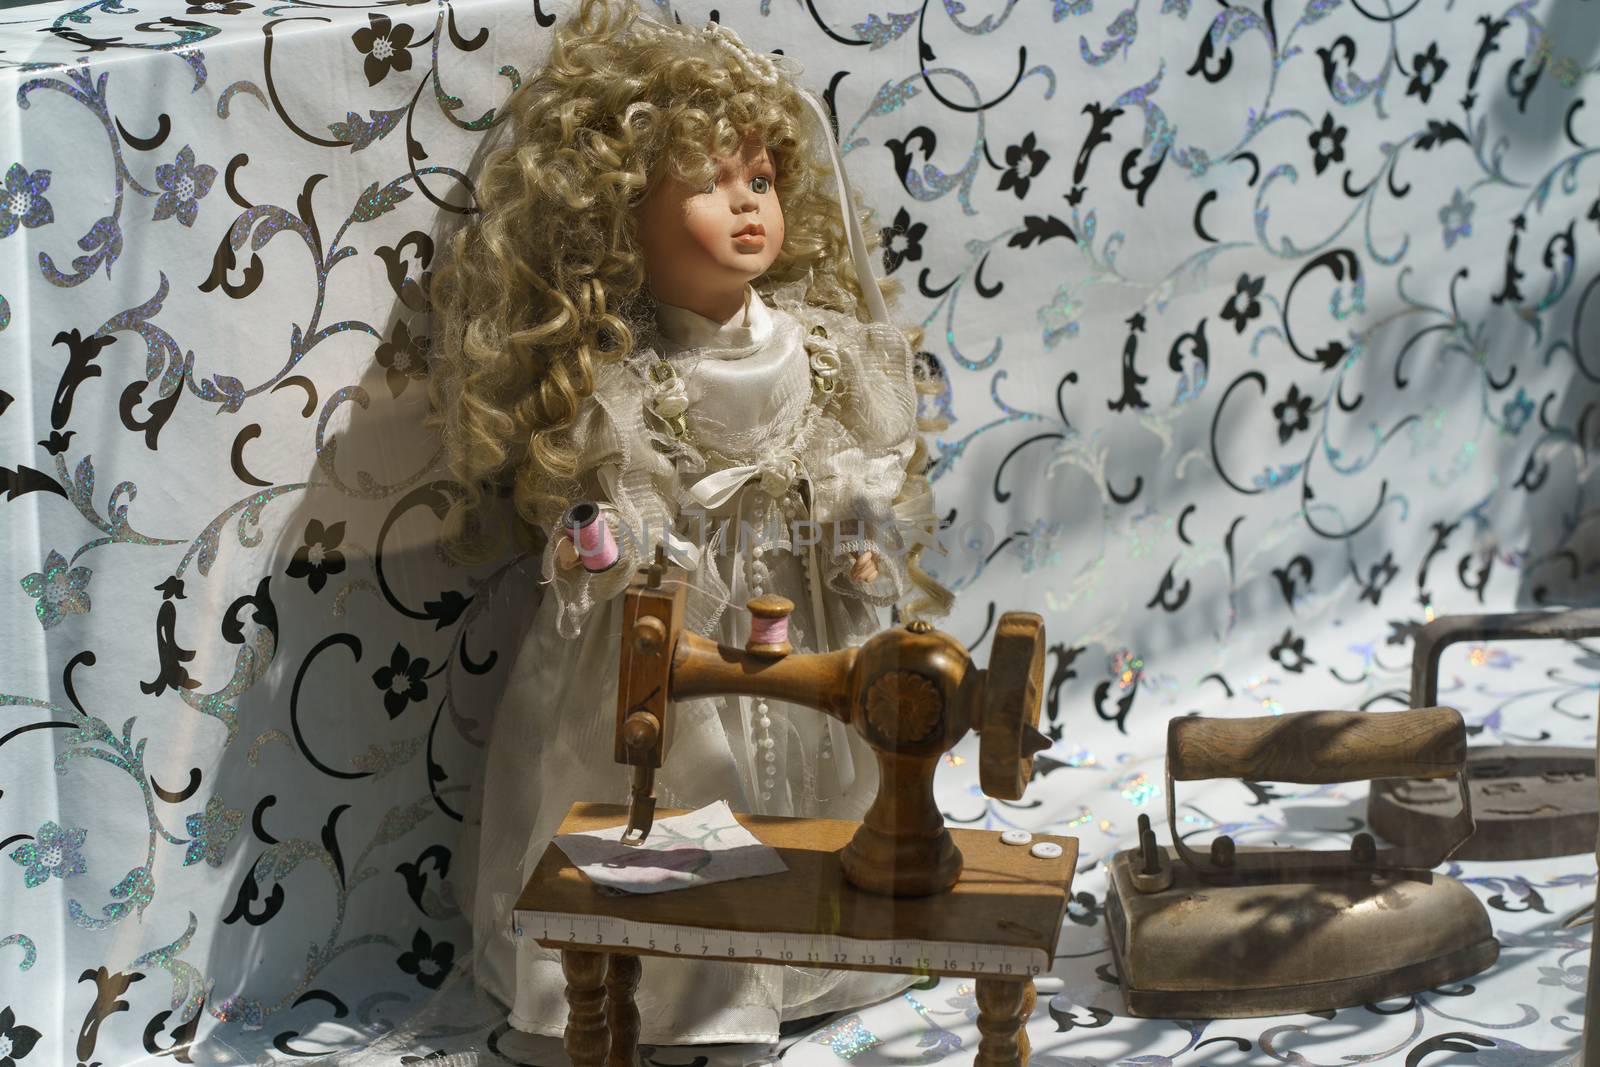 Image of old fashioned cute doll with iron and sewing machine